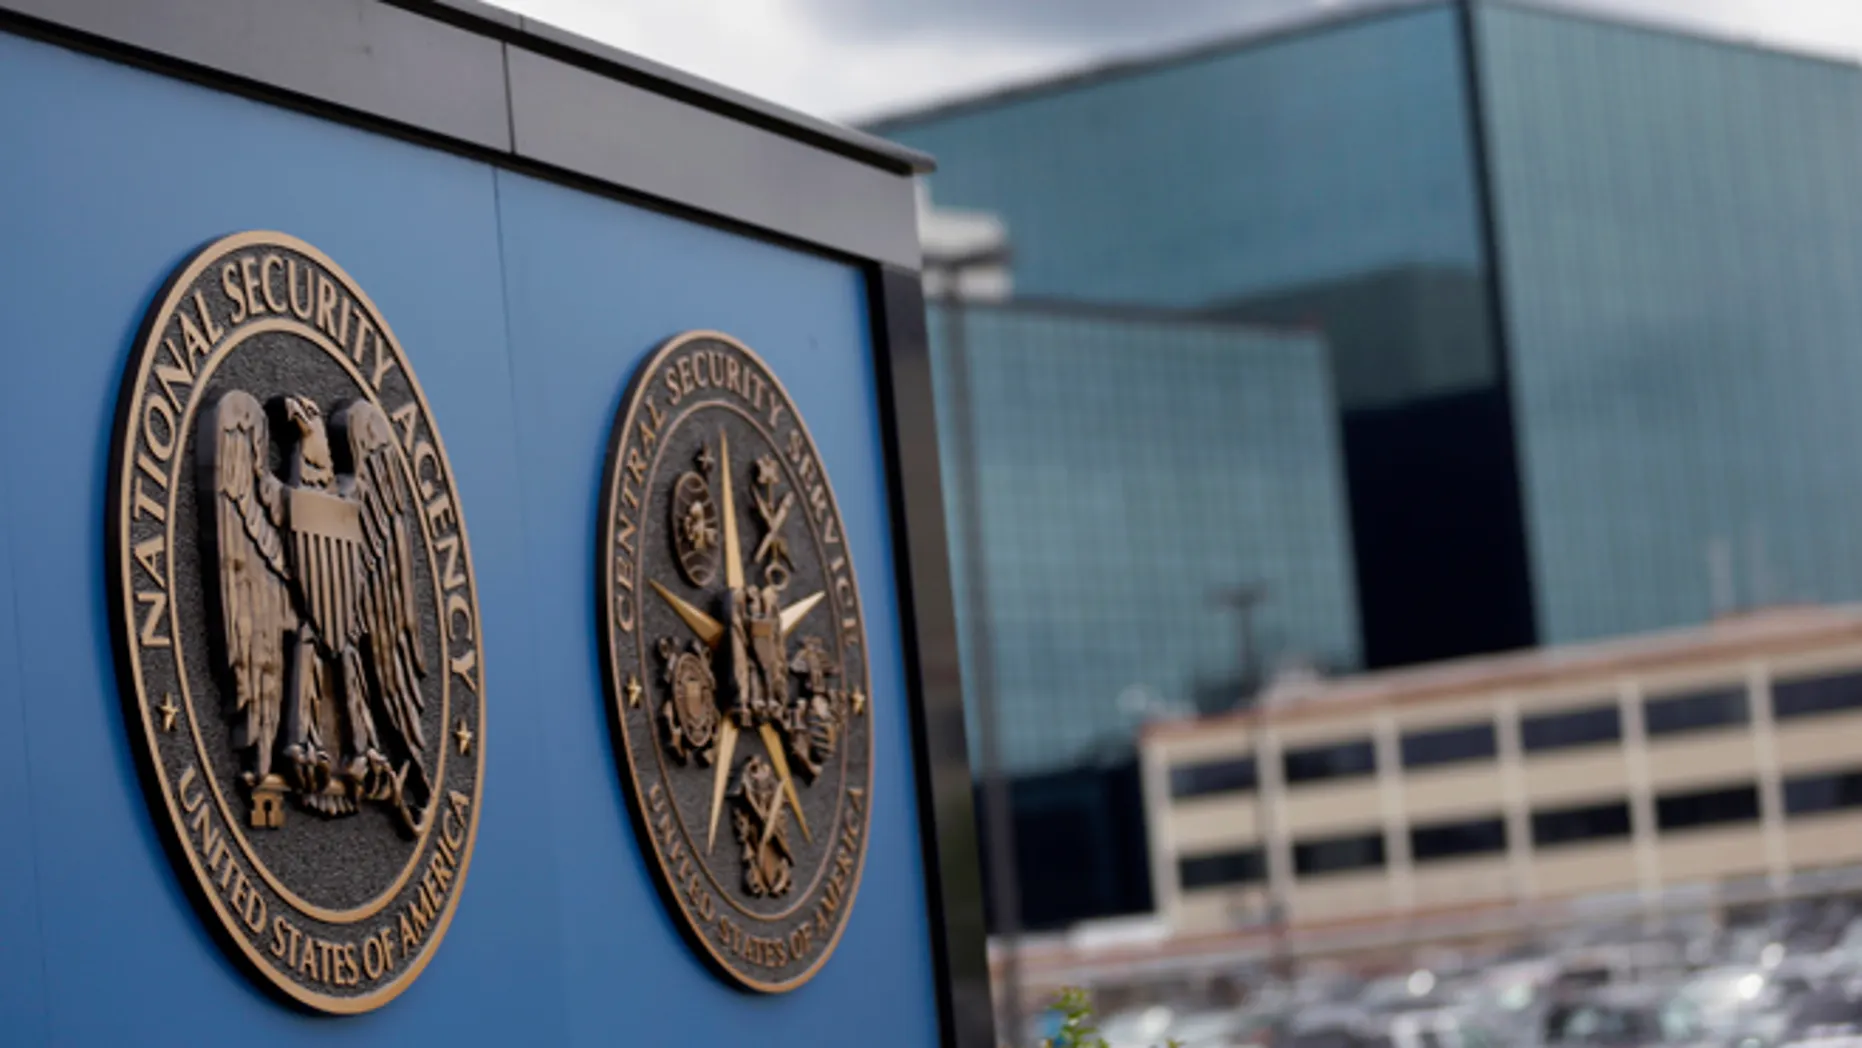 NSA employee indicted for allegedly transmitting classified information to unauthorized person